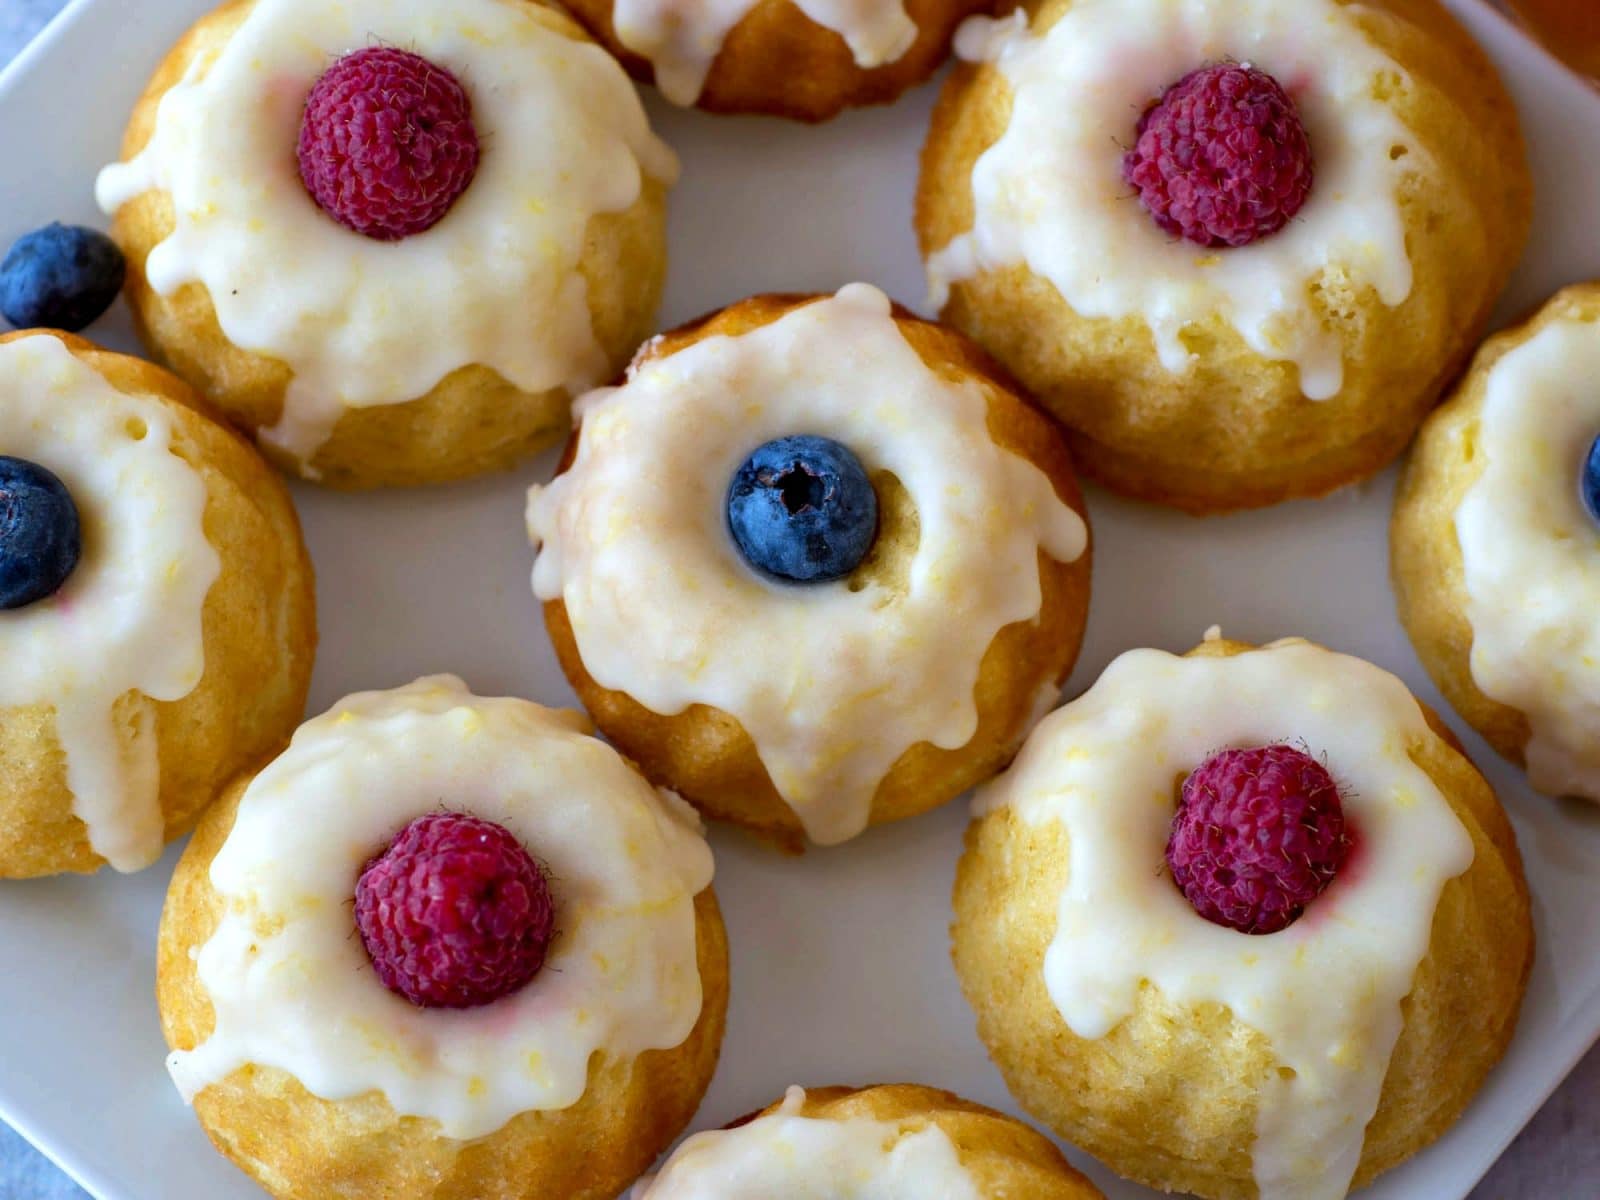 Top view of Lemon Bundt Cakes with raspberries and blueberries